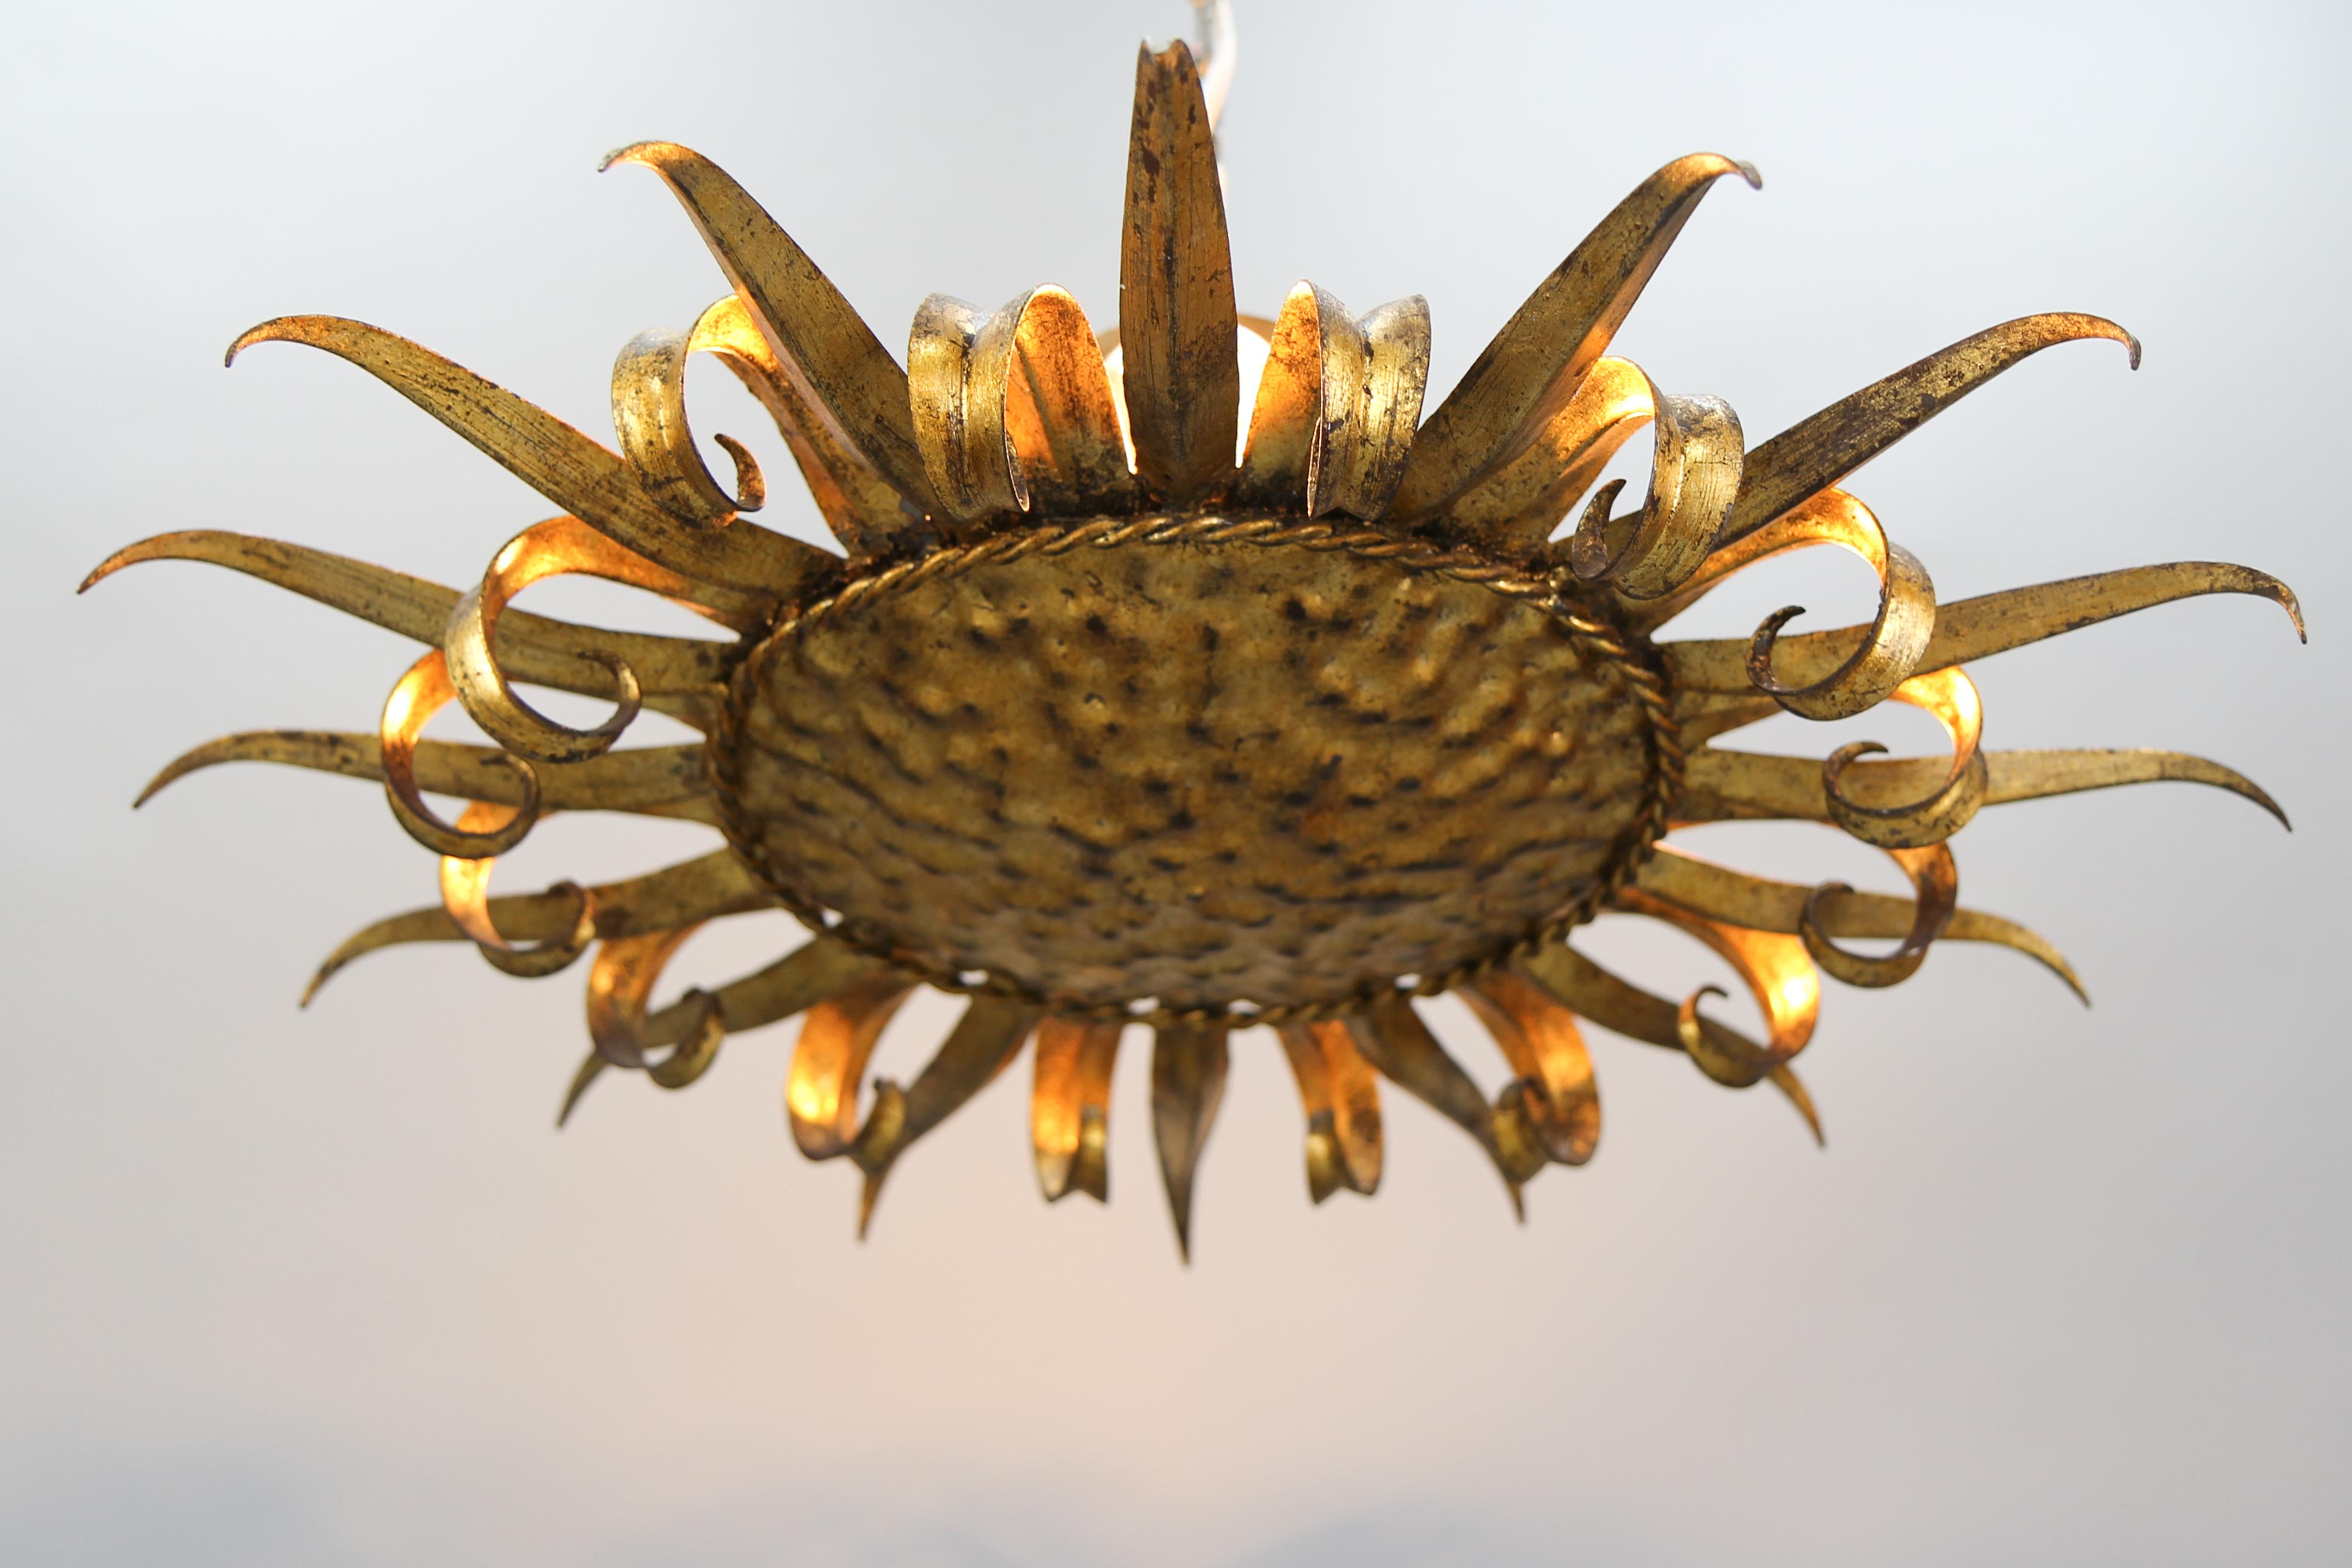 Mid-Century gilt metal sun-shaped sunburst ceiling light, Spain, circa the 1950s.
This beautiful Mid-Century Modern period sun-shaped ceiling light features a gilt metal one-tier curved and straight sunburst rays or eyelash-like motif and is